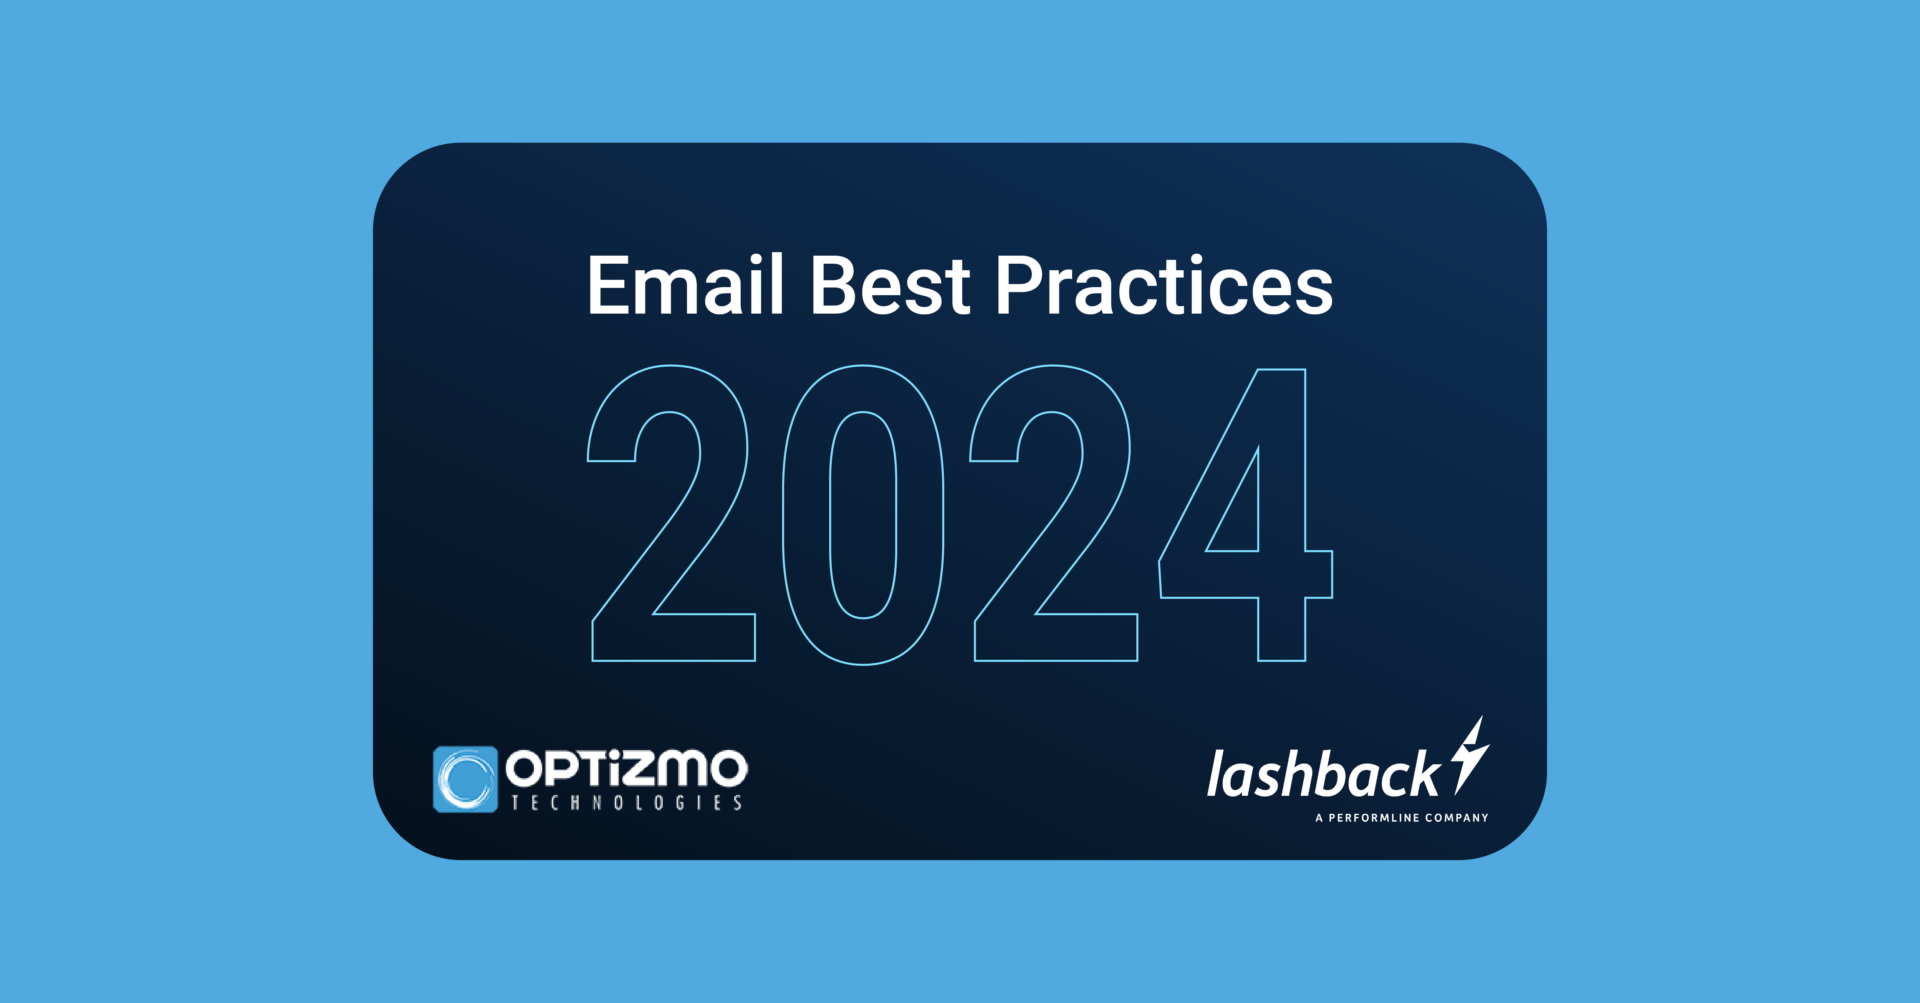 Email Marketing Best Practices Guide